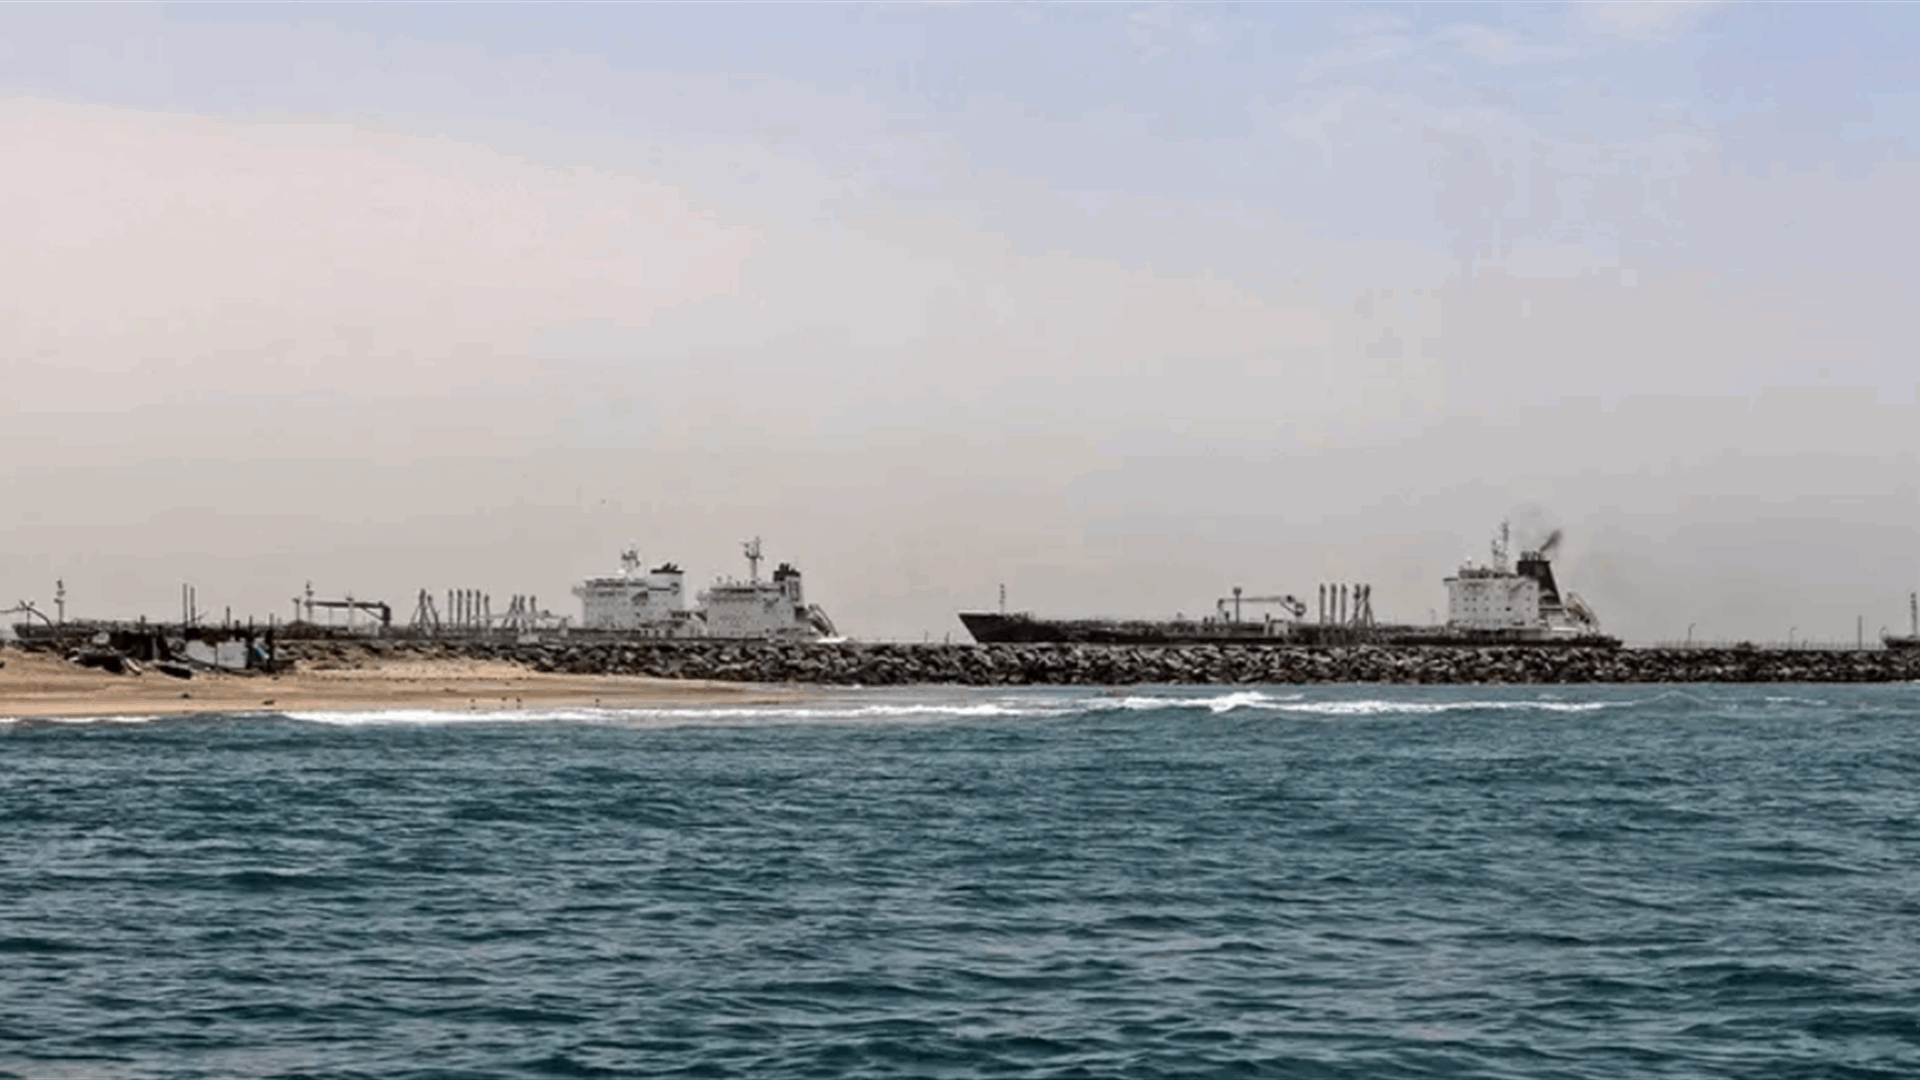 UKMTO receives report of a distress call from vessel southeast of Yemen’s Nishtun